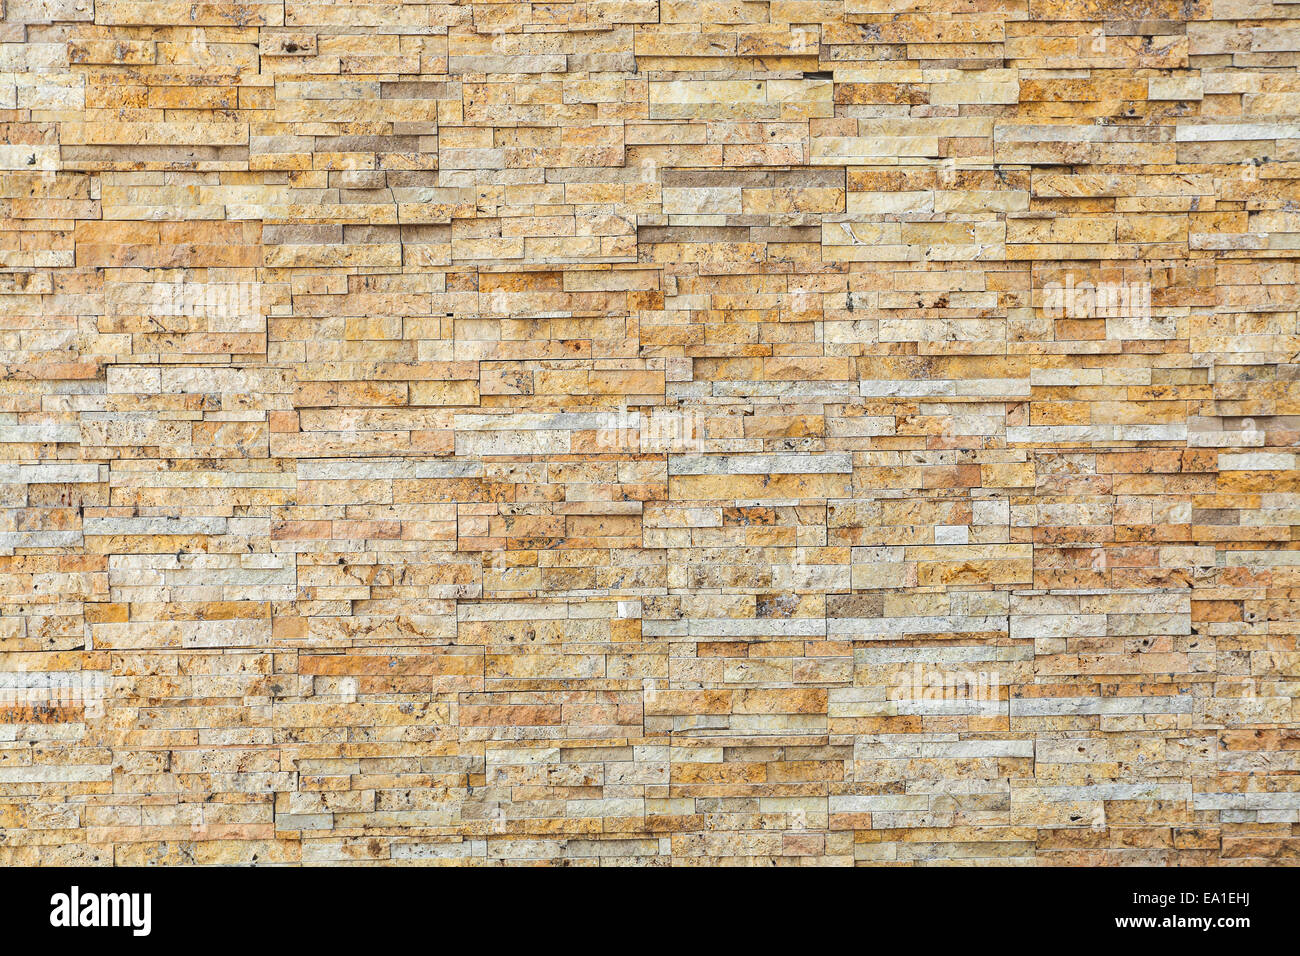 Stone Wall background Banque D'Images